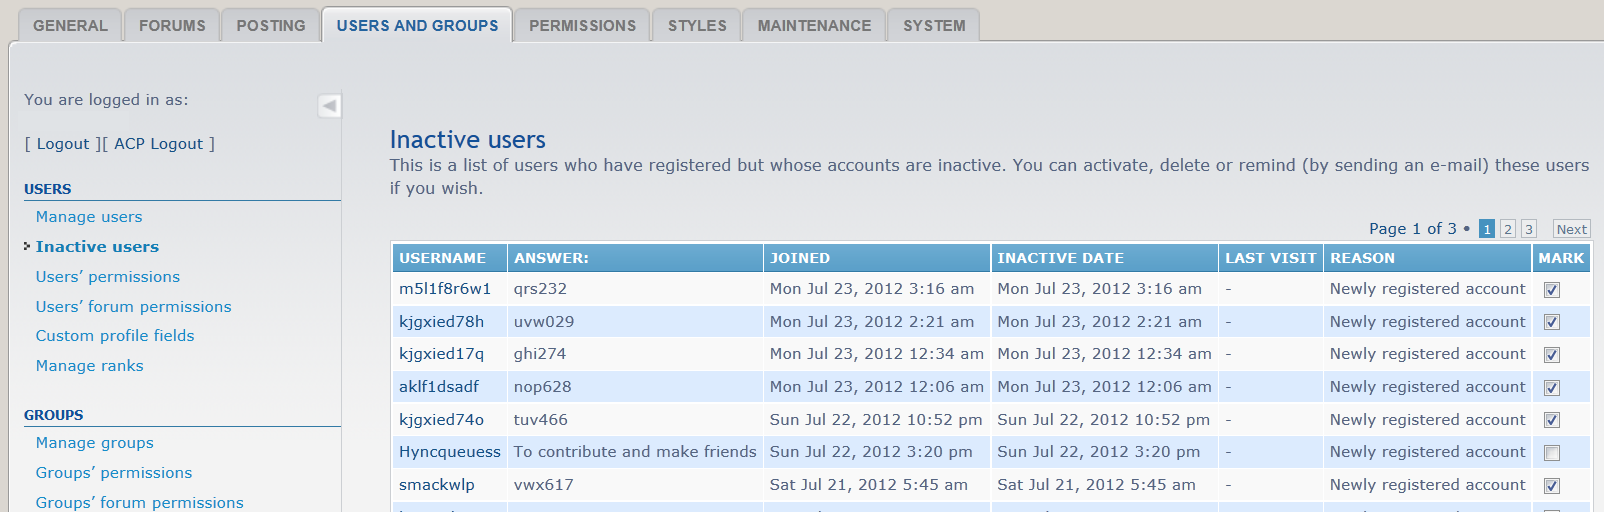 Add custom profile fields to 'inactive users' list